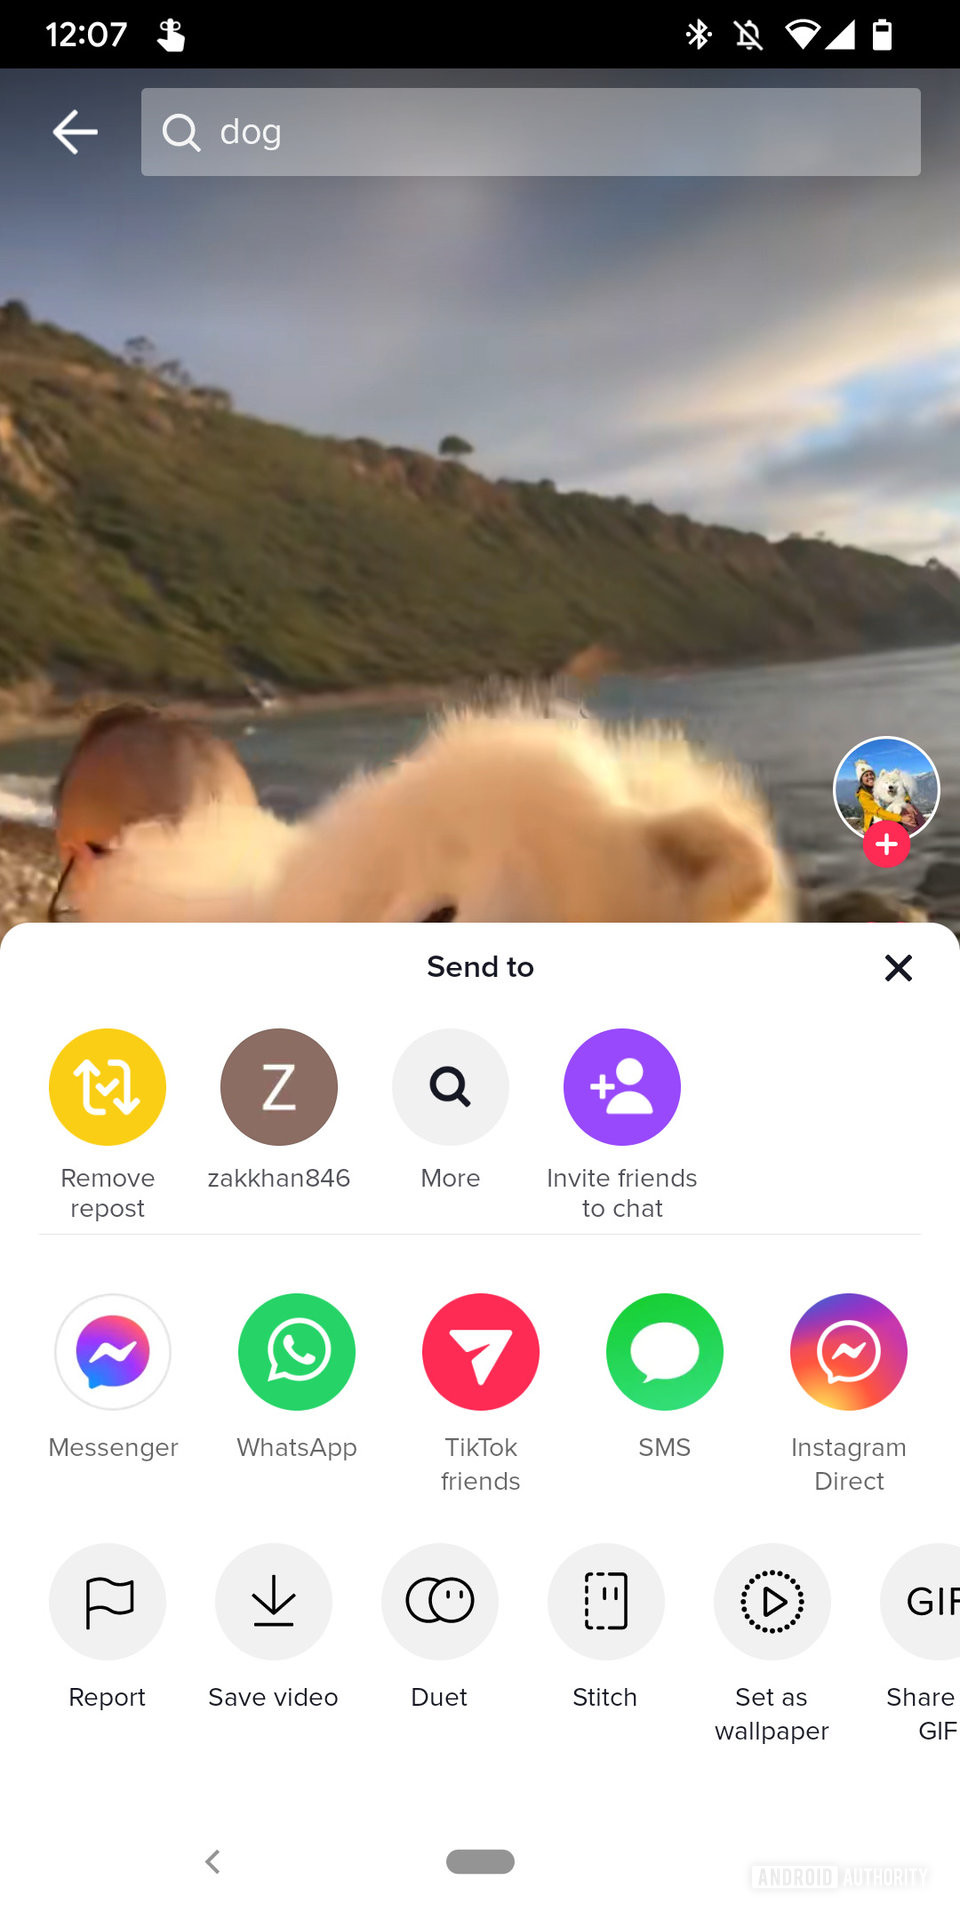 A screenshot of a TikTok video showing the sharing menu with the "Remove repost" option visible.